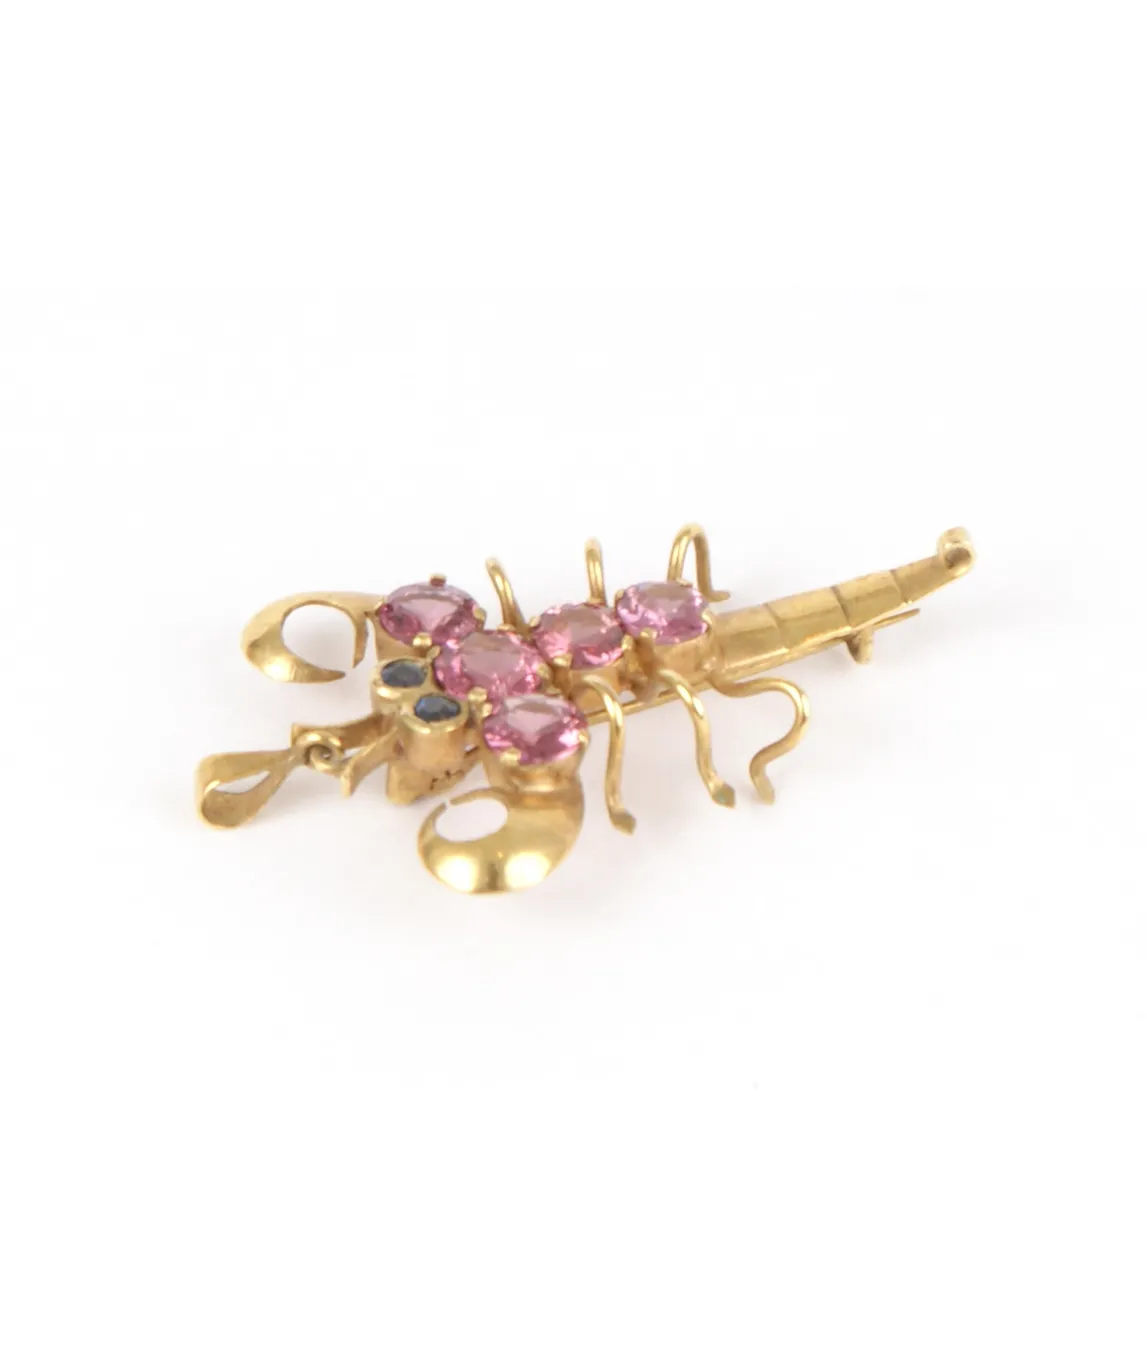 Scorpion brooch with pink crystals